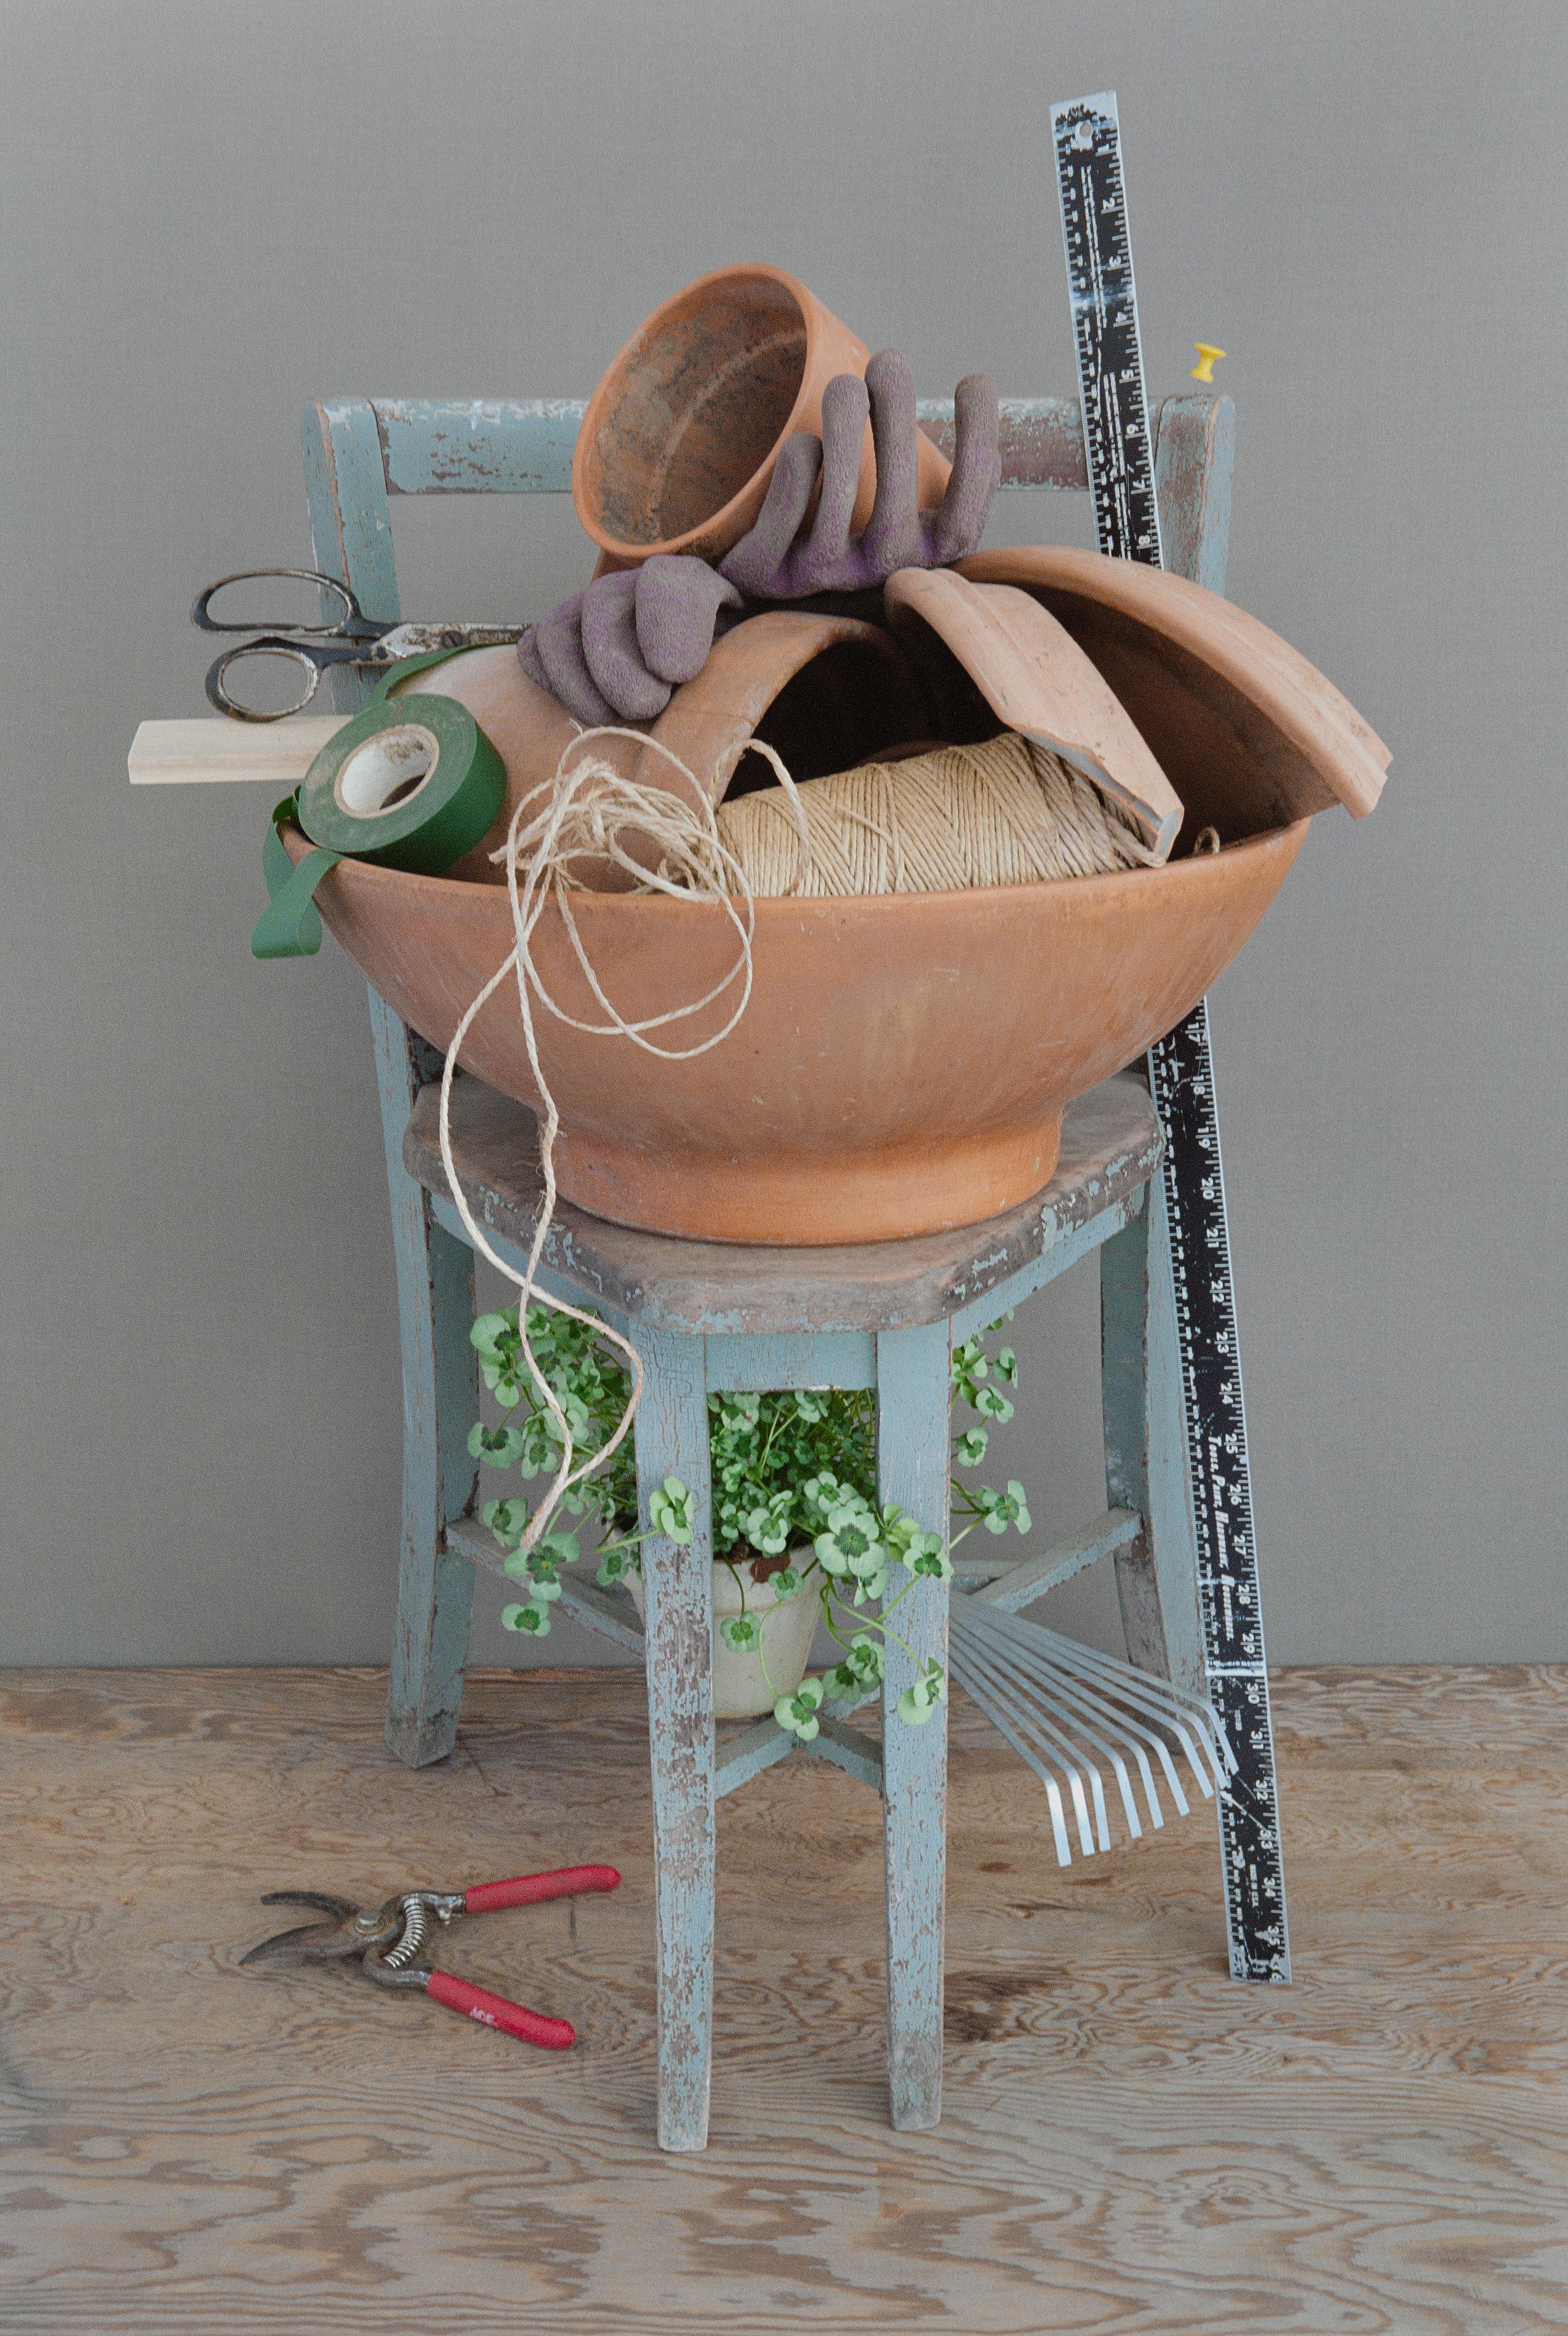 Contemporary still life photograph of domestic objects and gardening tools by David Halliday 
"Garden Chair", ed. 1 of 7, archival pigment print
29.75 x 20 inches unframed, 34 x 24.5 x 1.5 inches framed
Custom Poplar wood shadowbox frame with